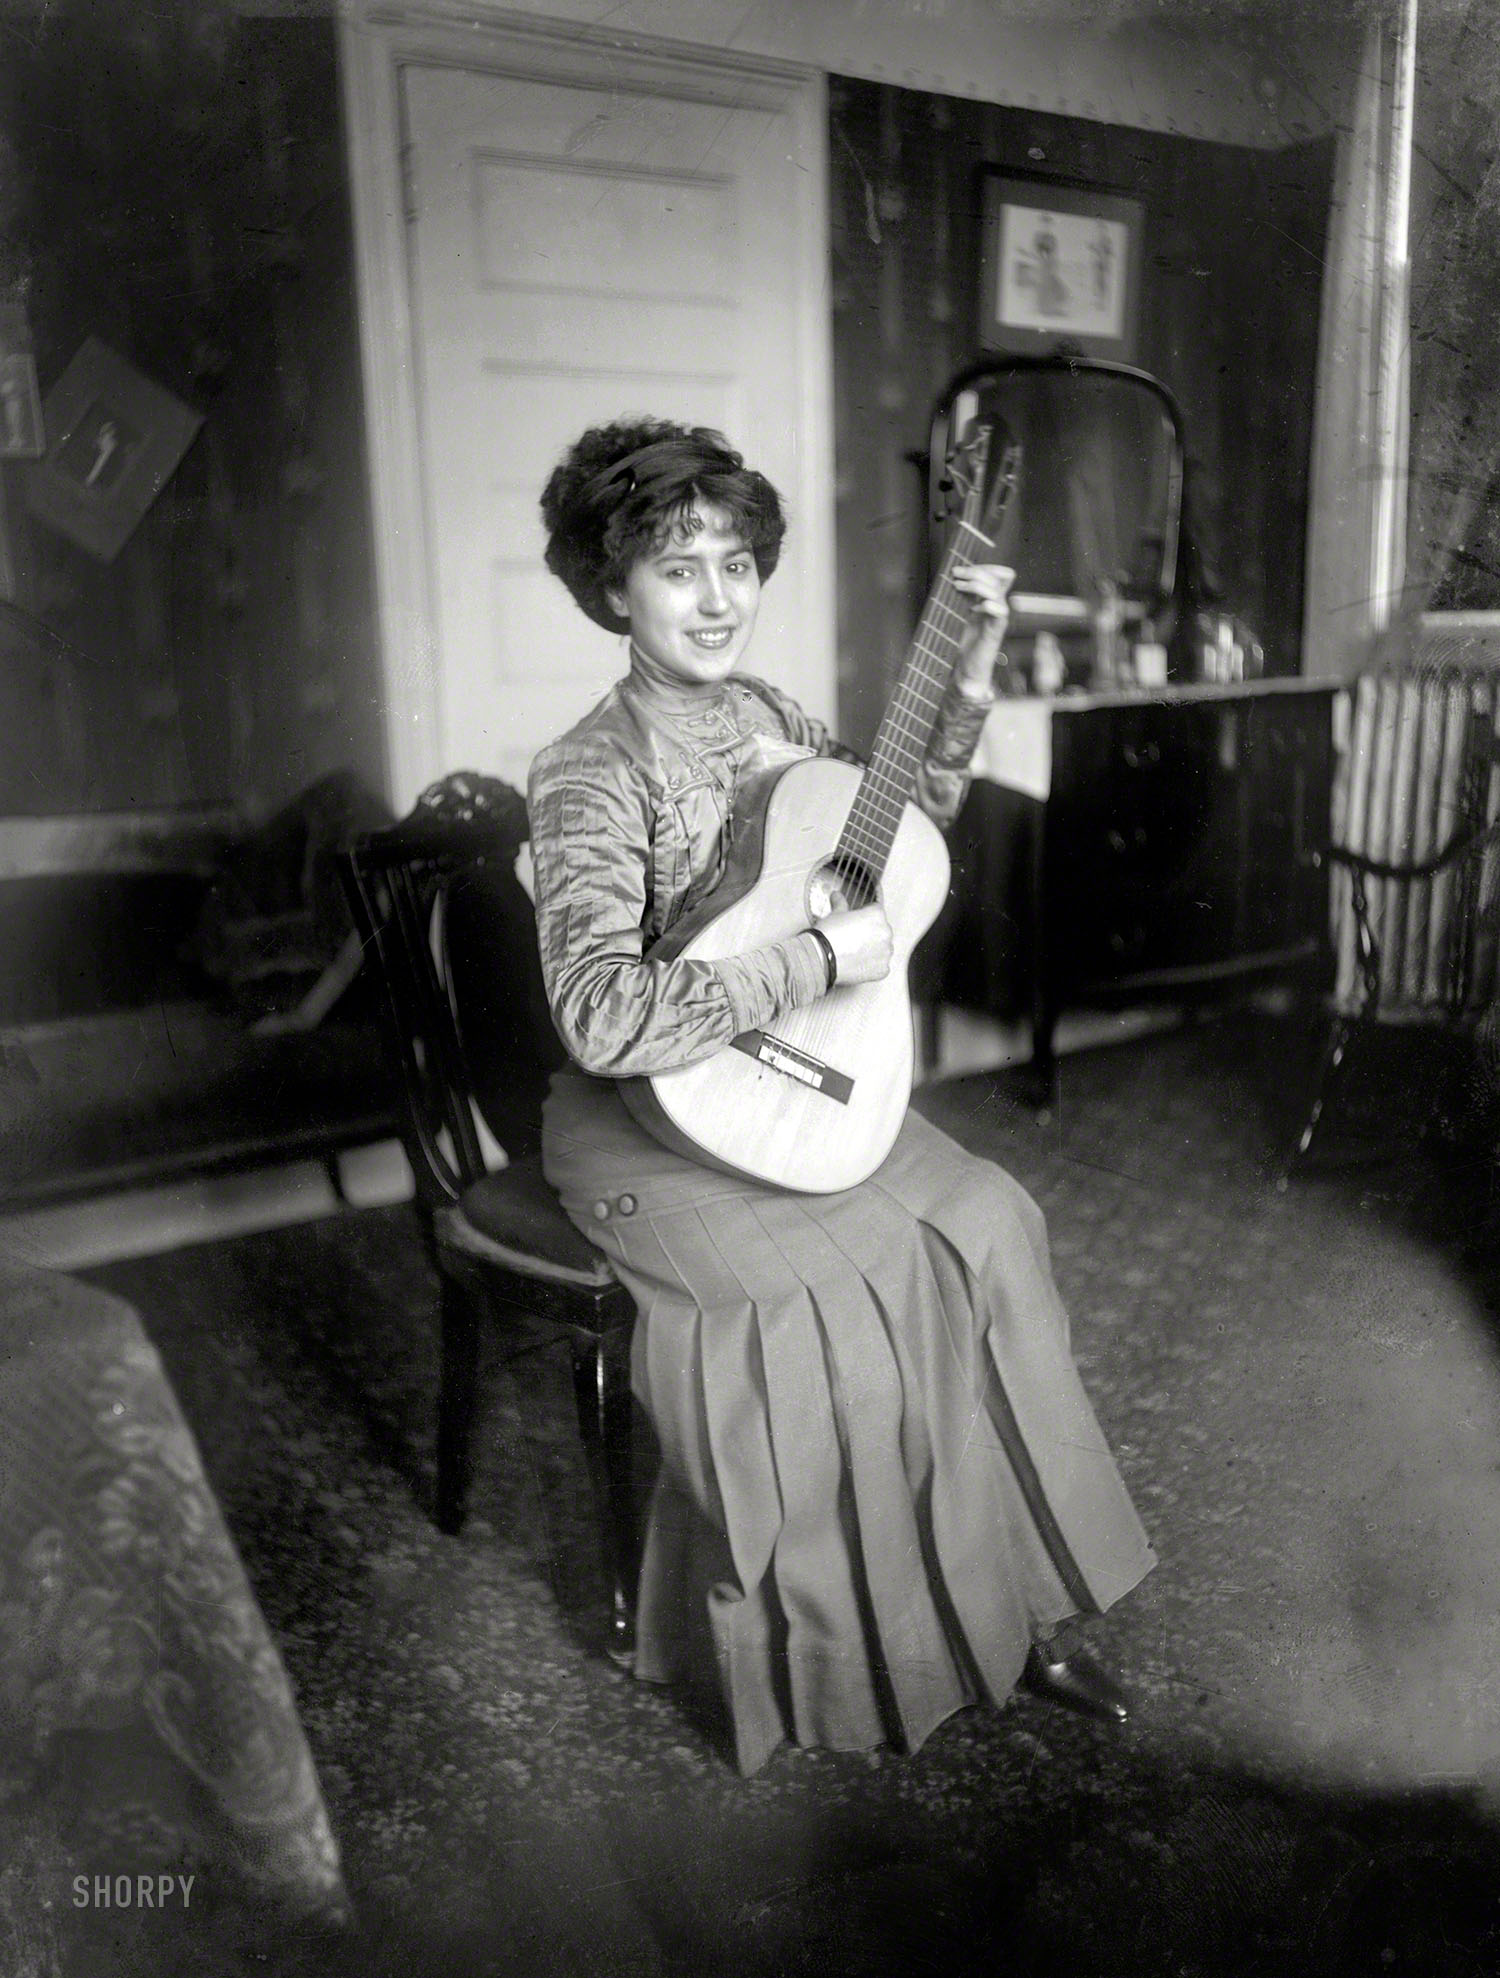 New York, 1910. "Elvira de Hildalgo." Our winsome Spanish soprano reprises her previous appearance, this time with instrumental accompaniment. Among her vocal pupils in later years was Maria Callas. 8x10 glass negative. View full size.